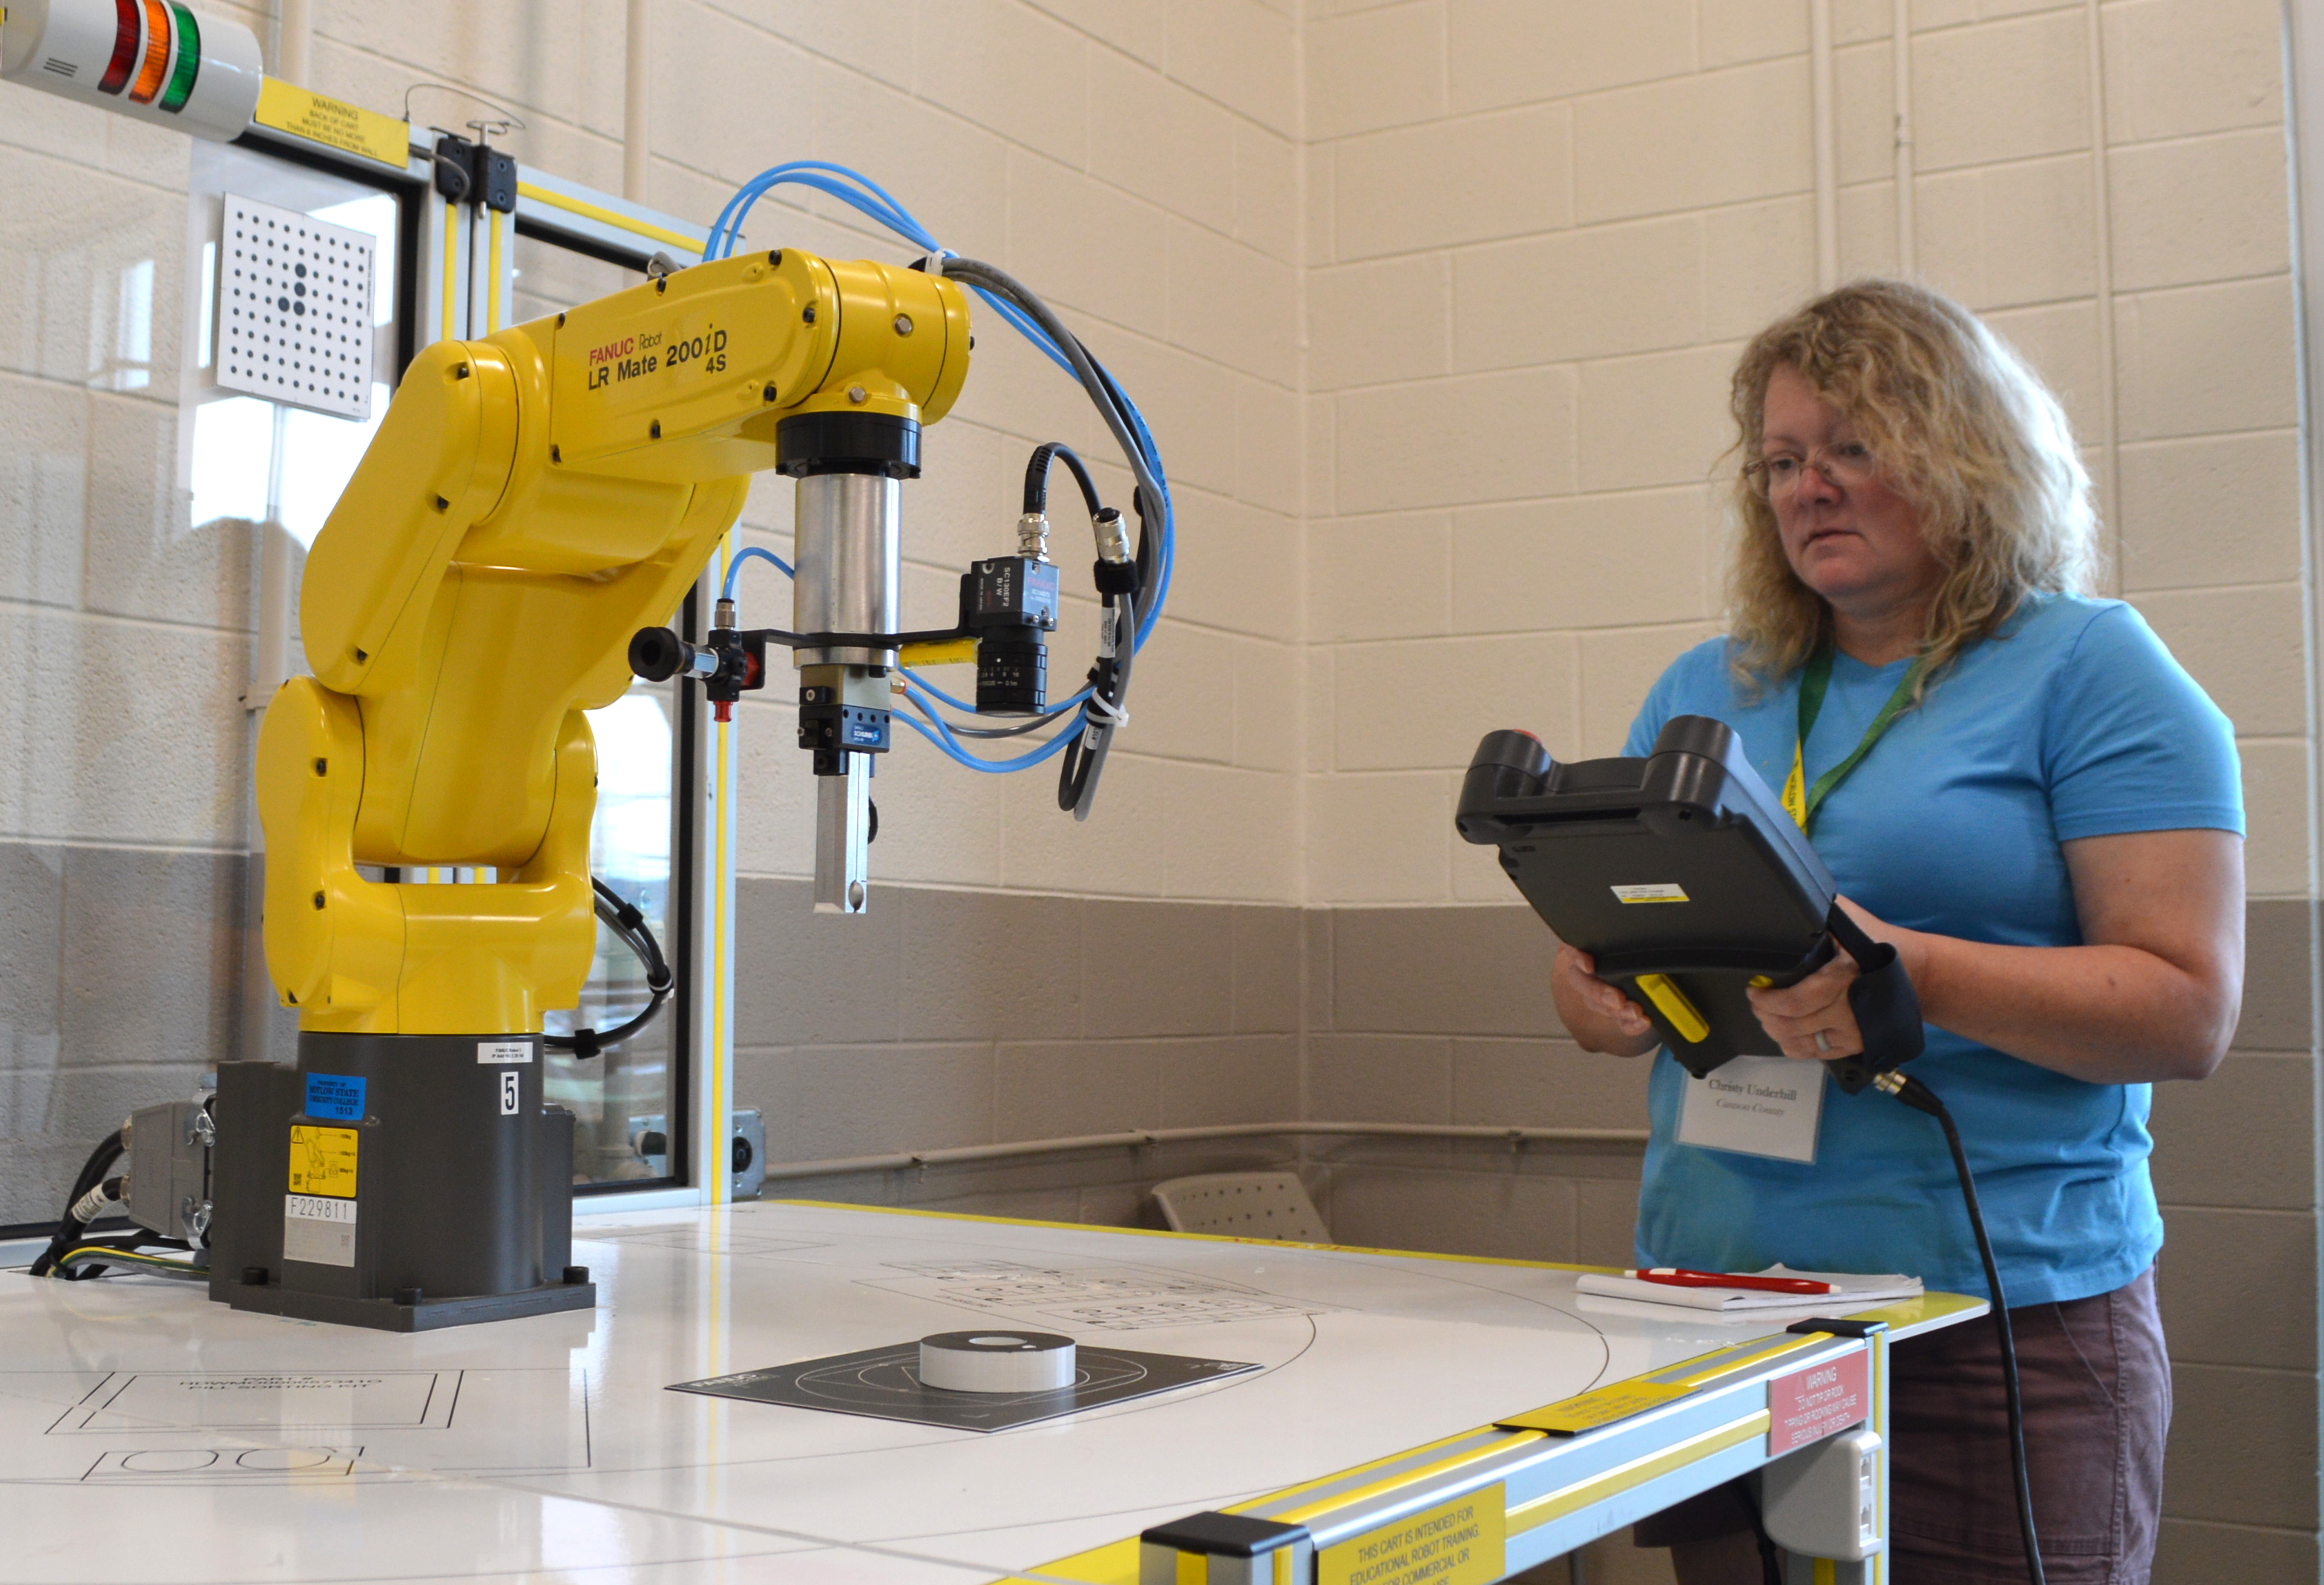 Cannon County Middle School Special Education teacher Christy Underhill practices programming a robotic arm at Motlow’s McMinnville campus on July 29 as part of the Motlow/TCAT In-Service Training Day.